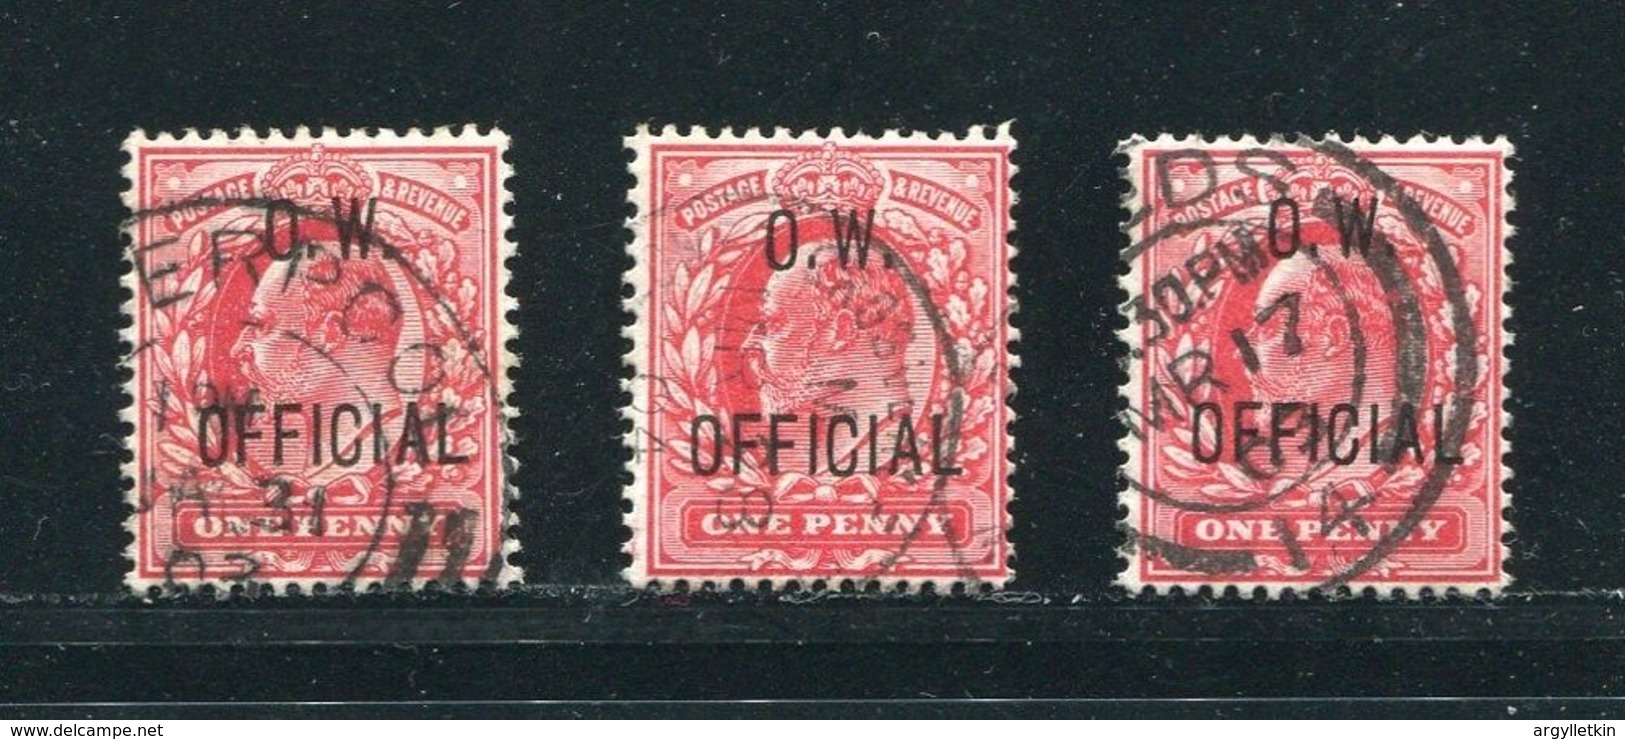 GB KING EDWARD 7TH OFFICIAL STAMPS O.W. OFFICIAL LEEDS LIVERPOOL - Ohne Zuordnung